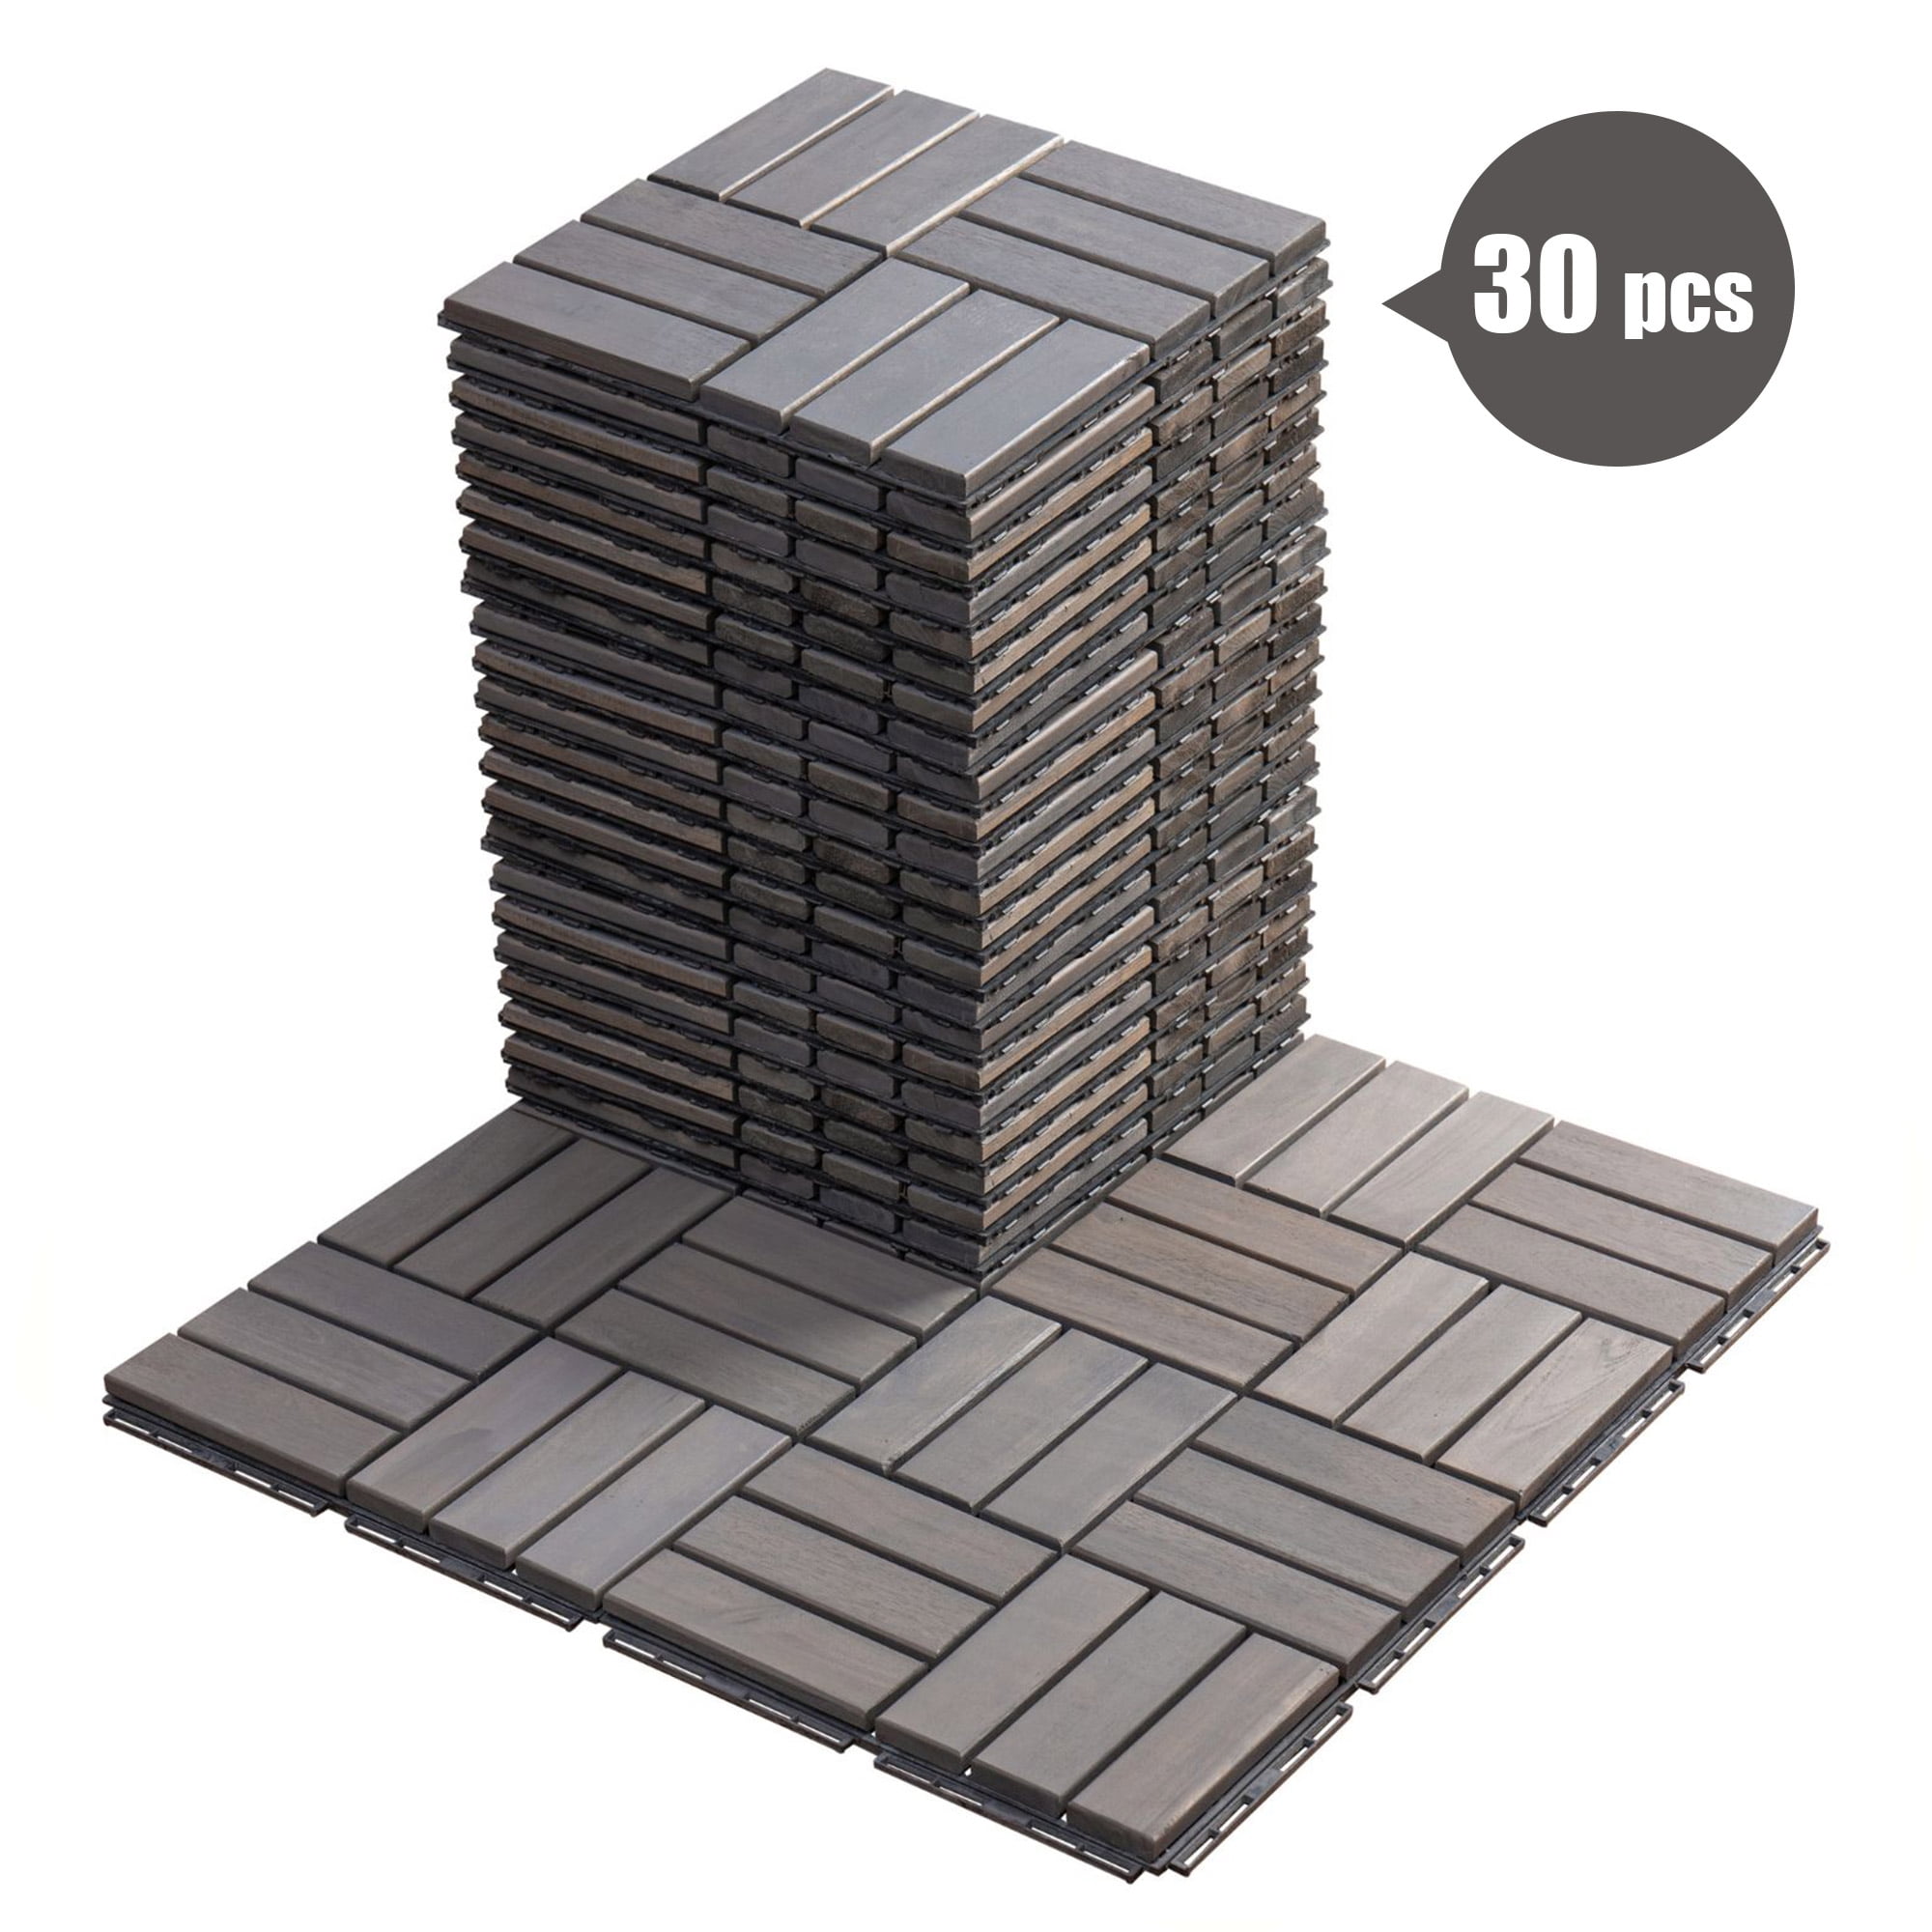 BTMWAY 1 ft. x 1 ft. Square Interlocking Acacia Wood Quick Patio Deck Tile  Outdoor Checker Pattern Flooring Tile (10 Per Box) CXXBN-GI33346W685-Tile01  - The Home Depot